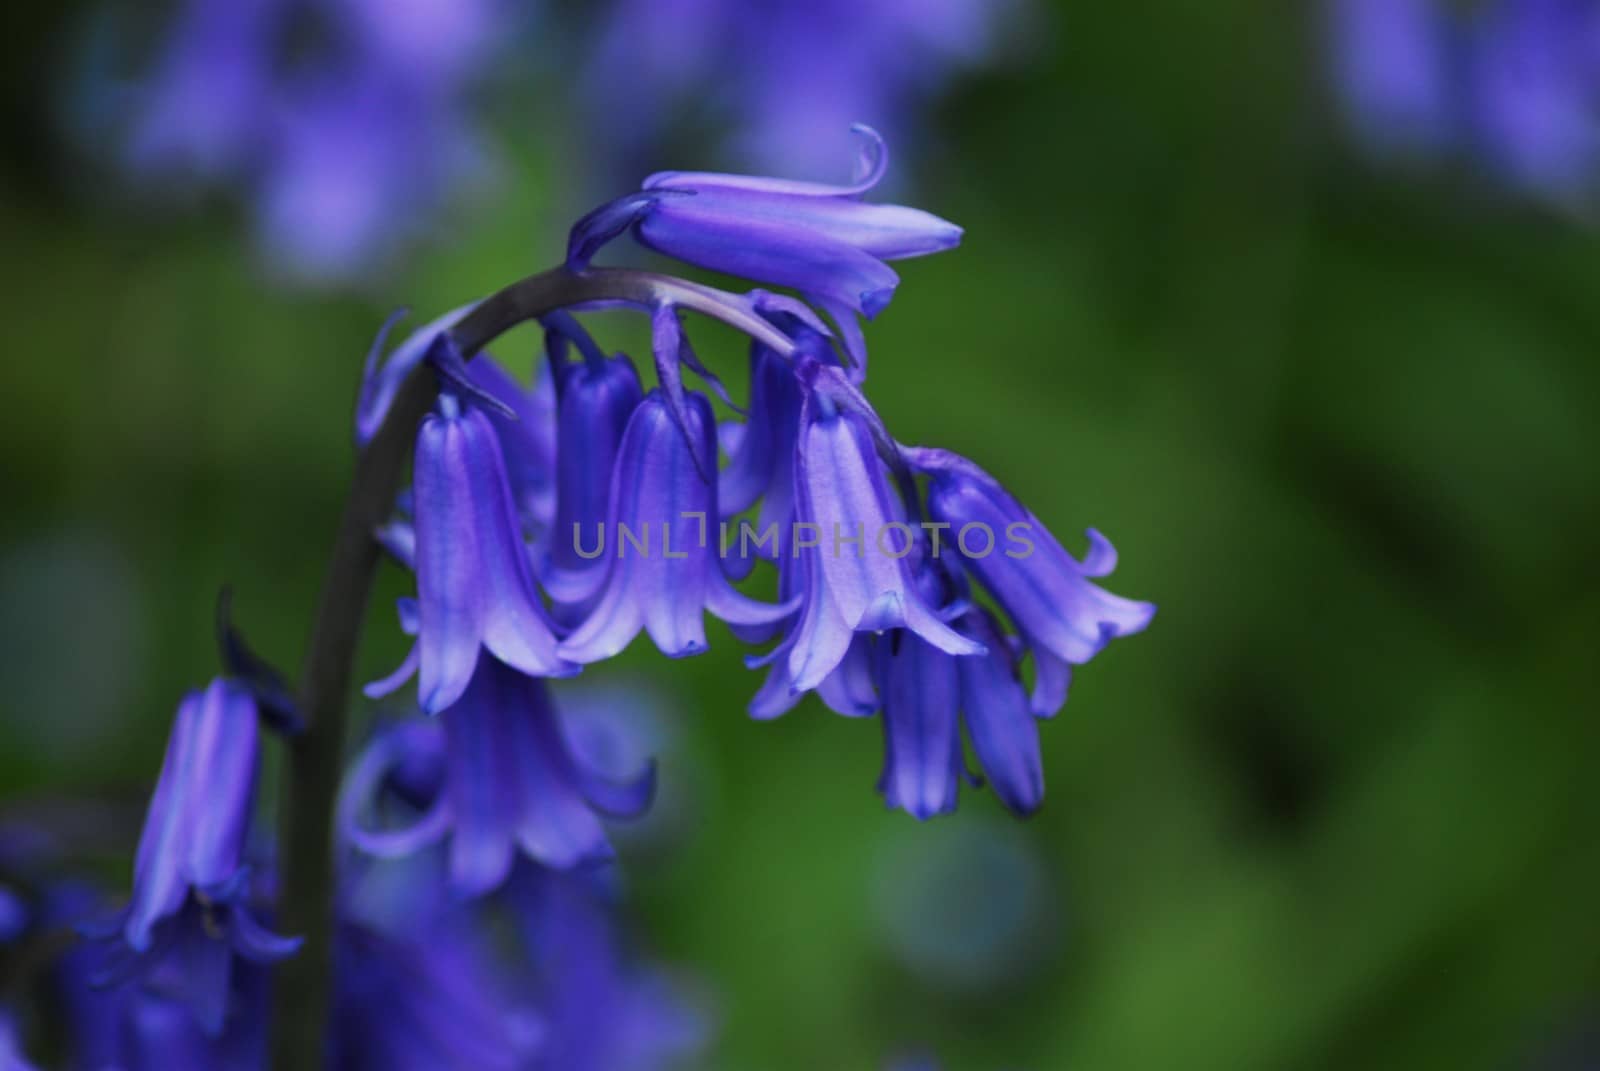 A close-up of a Hyacinthoides hispanica in blossom